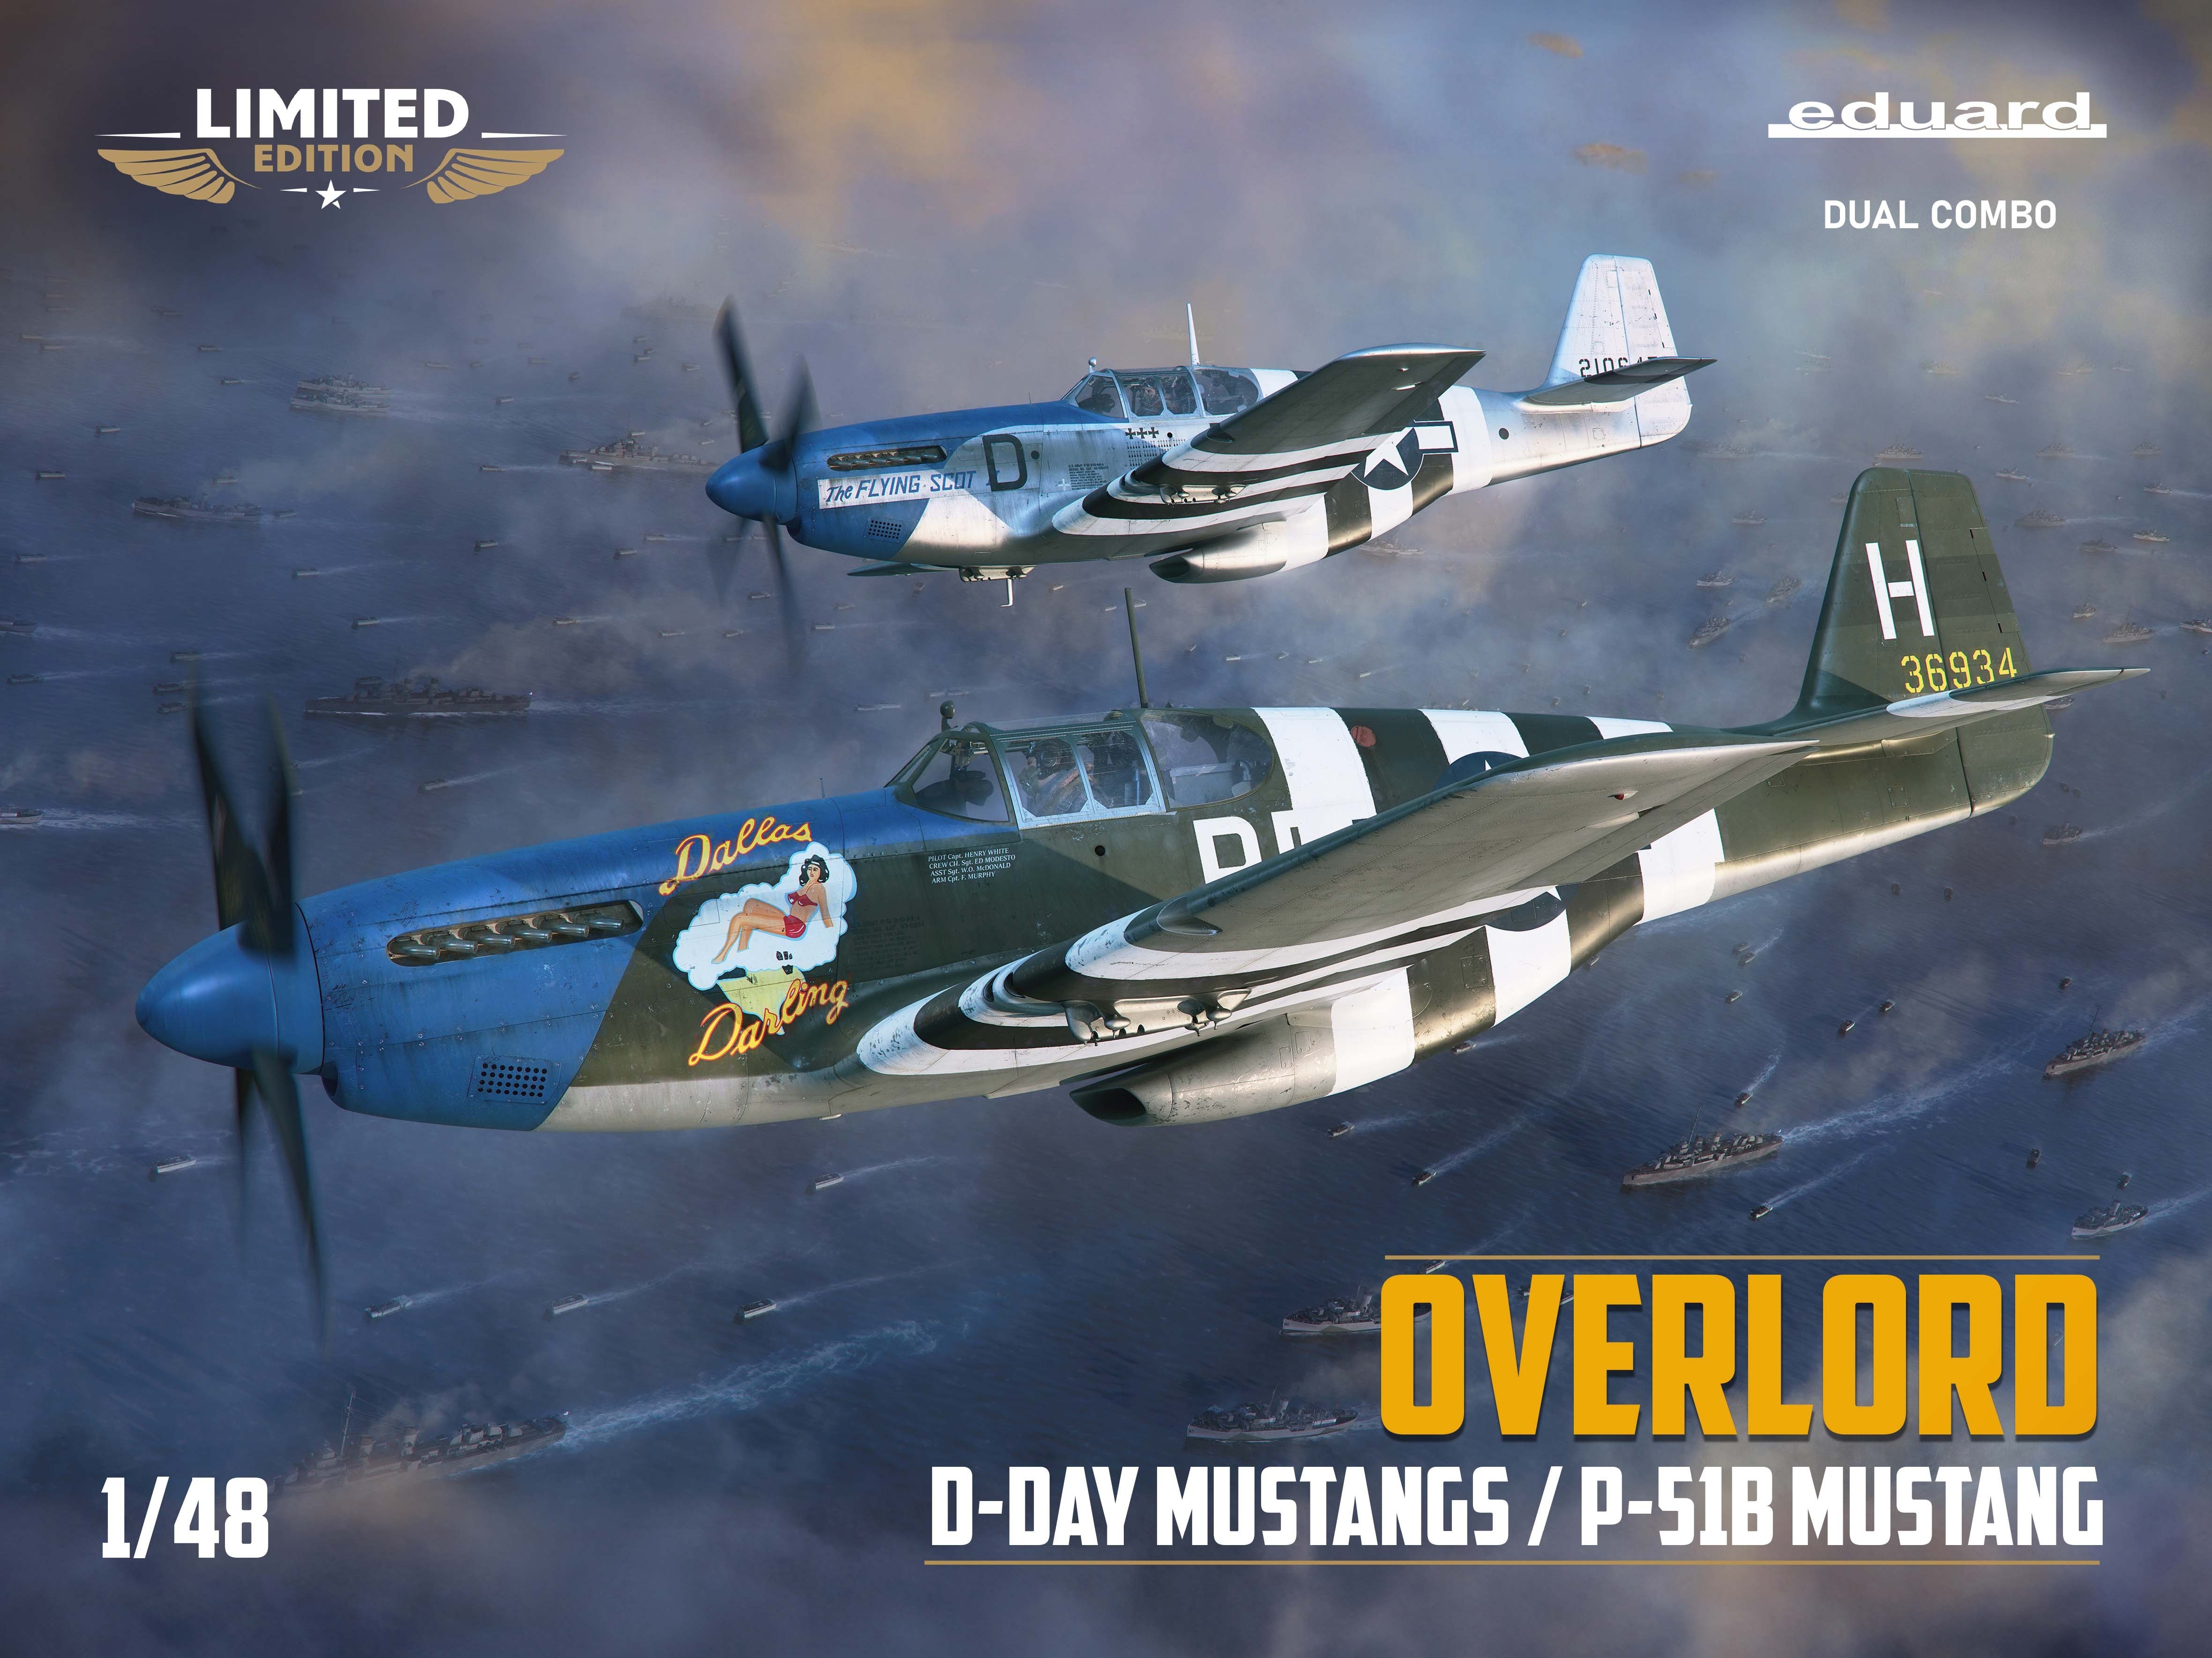 OVERLORD: D-DAY MUSTANGS: New tool, Limited Edition, Dual Combo kit